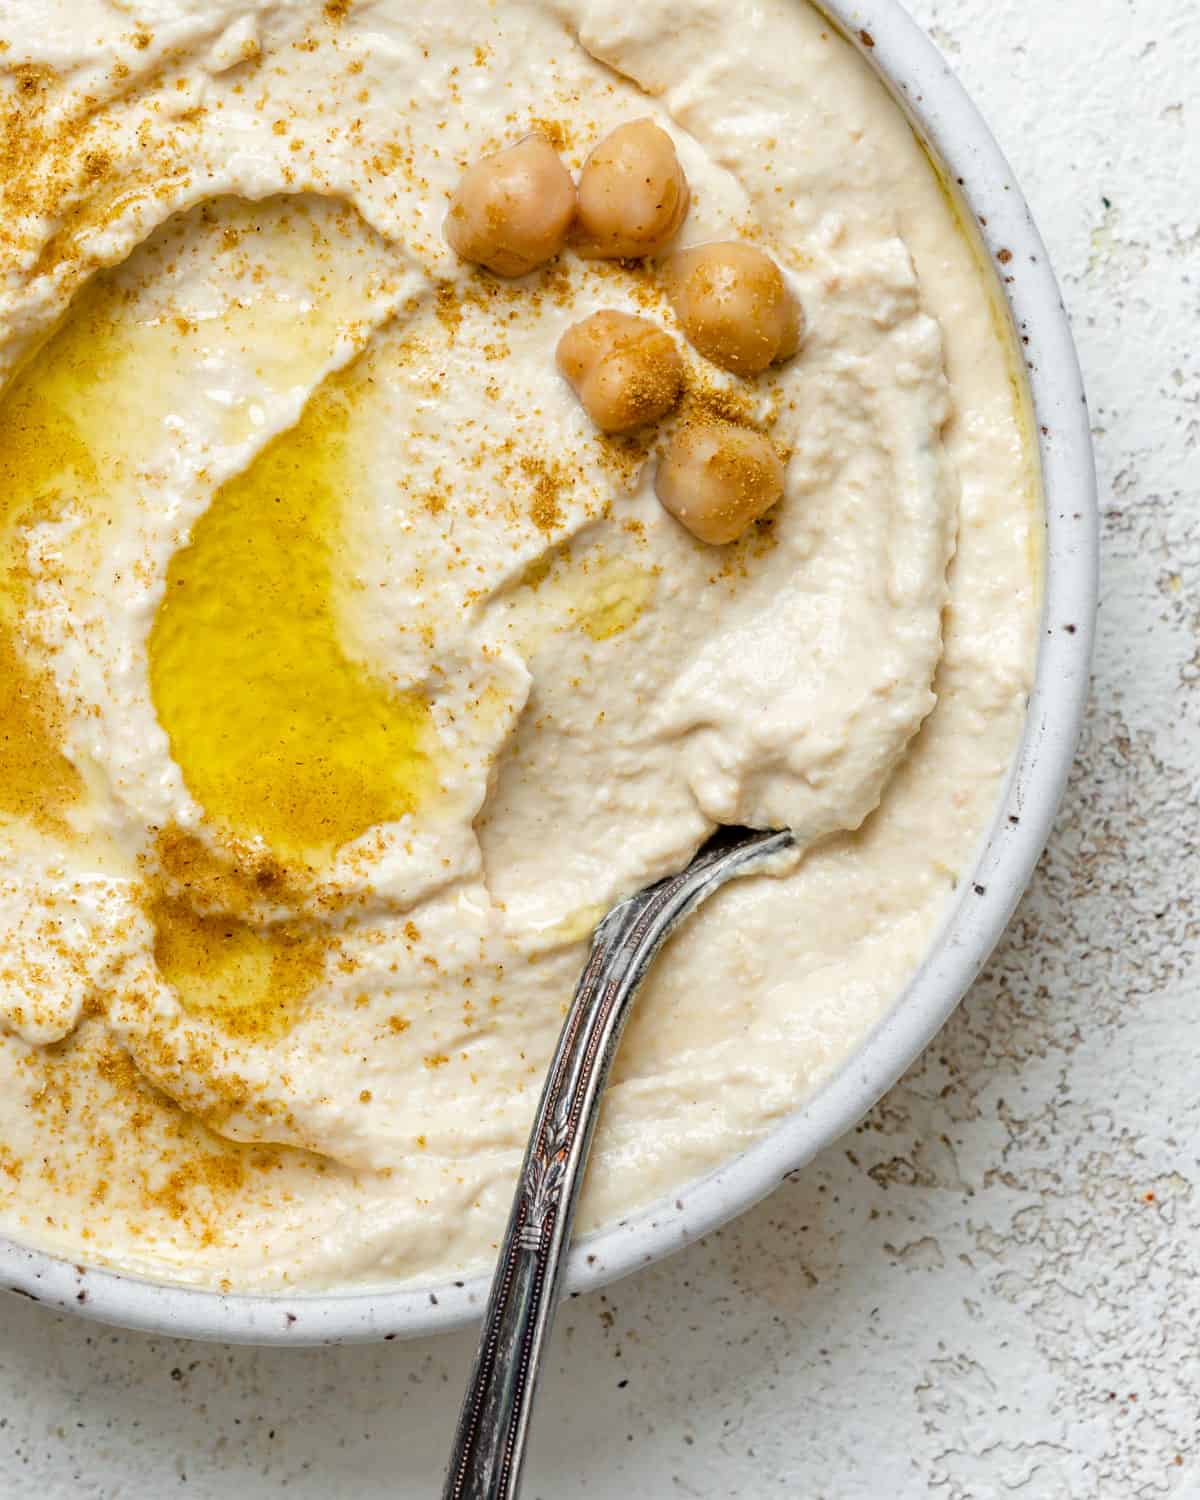 completed Easy Hummus in a bowl against a light background